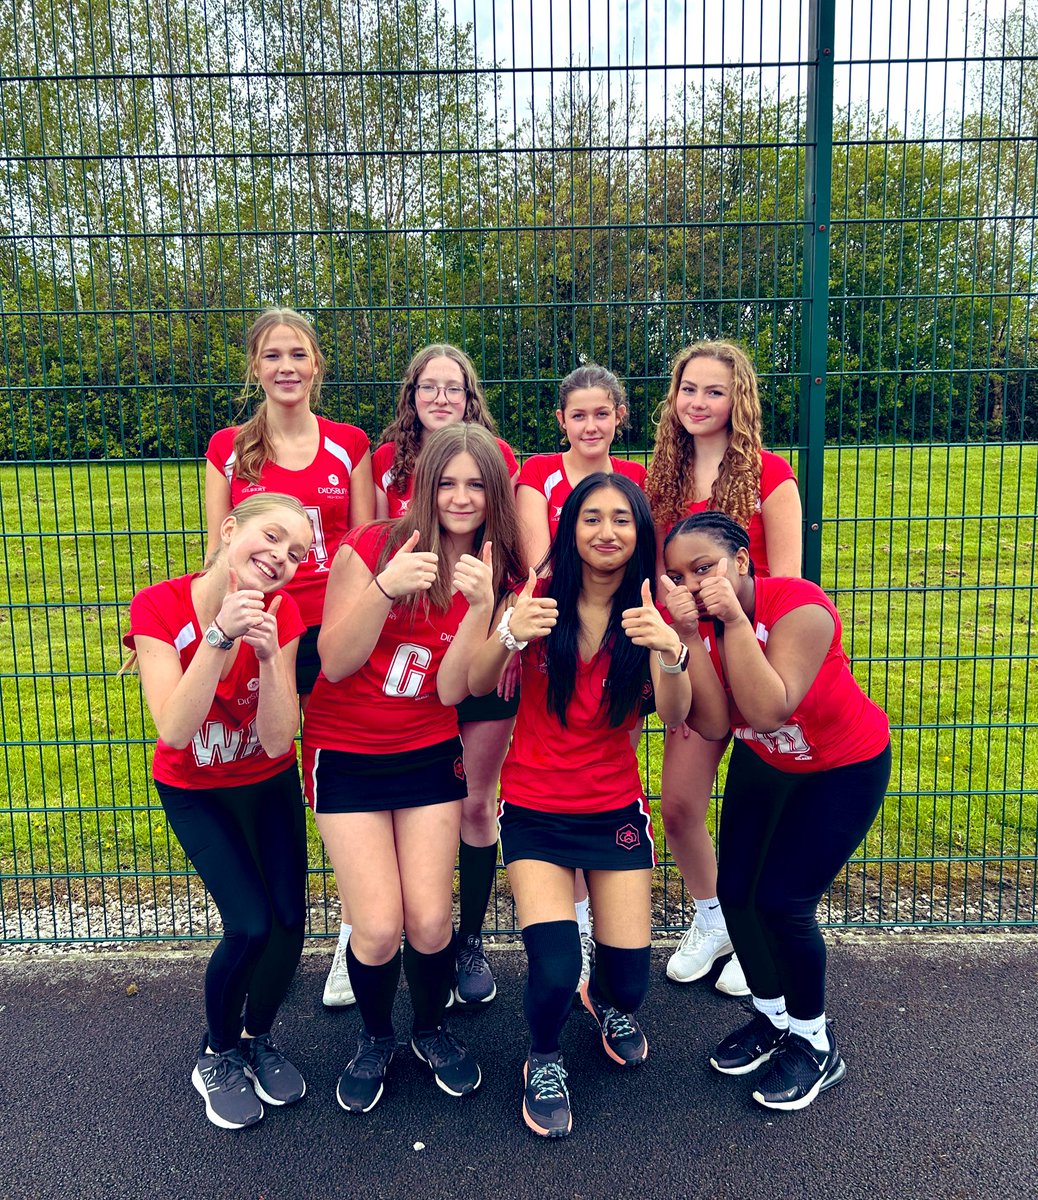 🏐 | Netball Congratulations to the Y10 netball team who have won this years @mcrschoolsPE netball plate. Coming away as 18-9 winners 👏🏼👏🏼